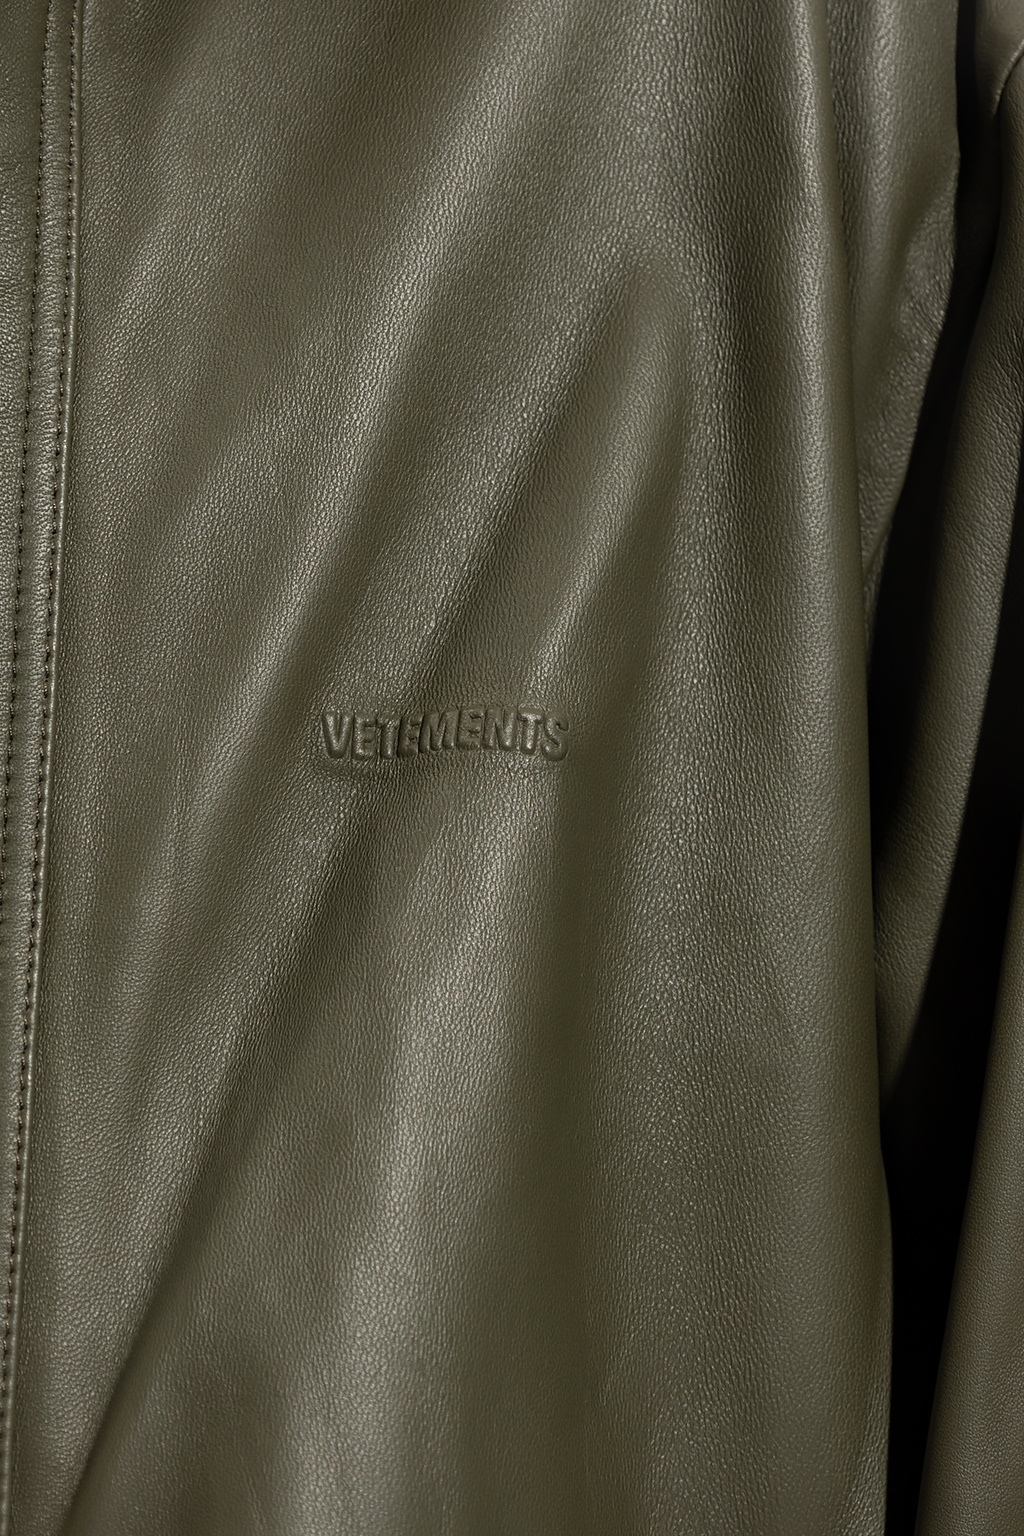 VETEMENTS of the worlds most desired brand